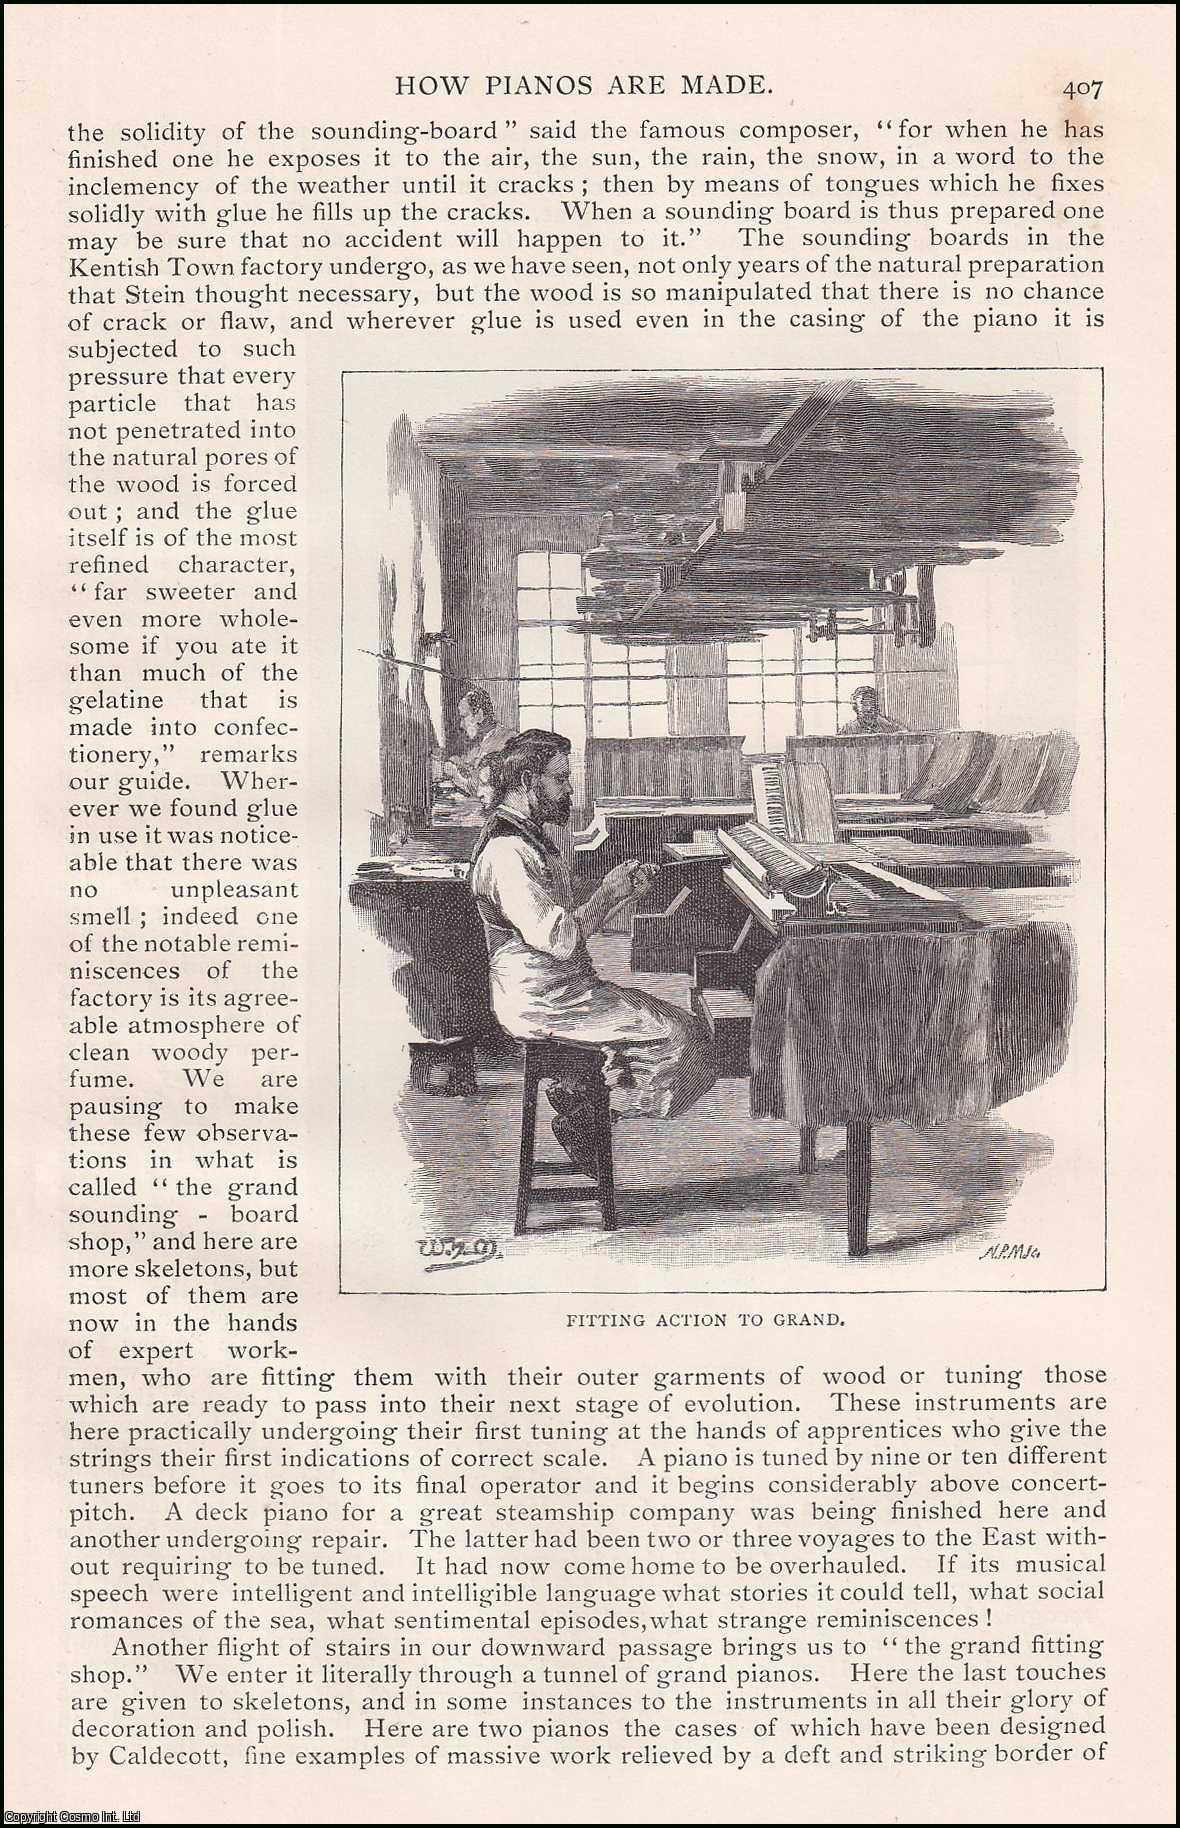 Joseph Hatton, illustrations by W.H. Margetson - How Pianos are Made. An original article from the English Illustrated Magazine, 1892.